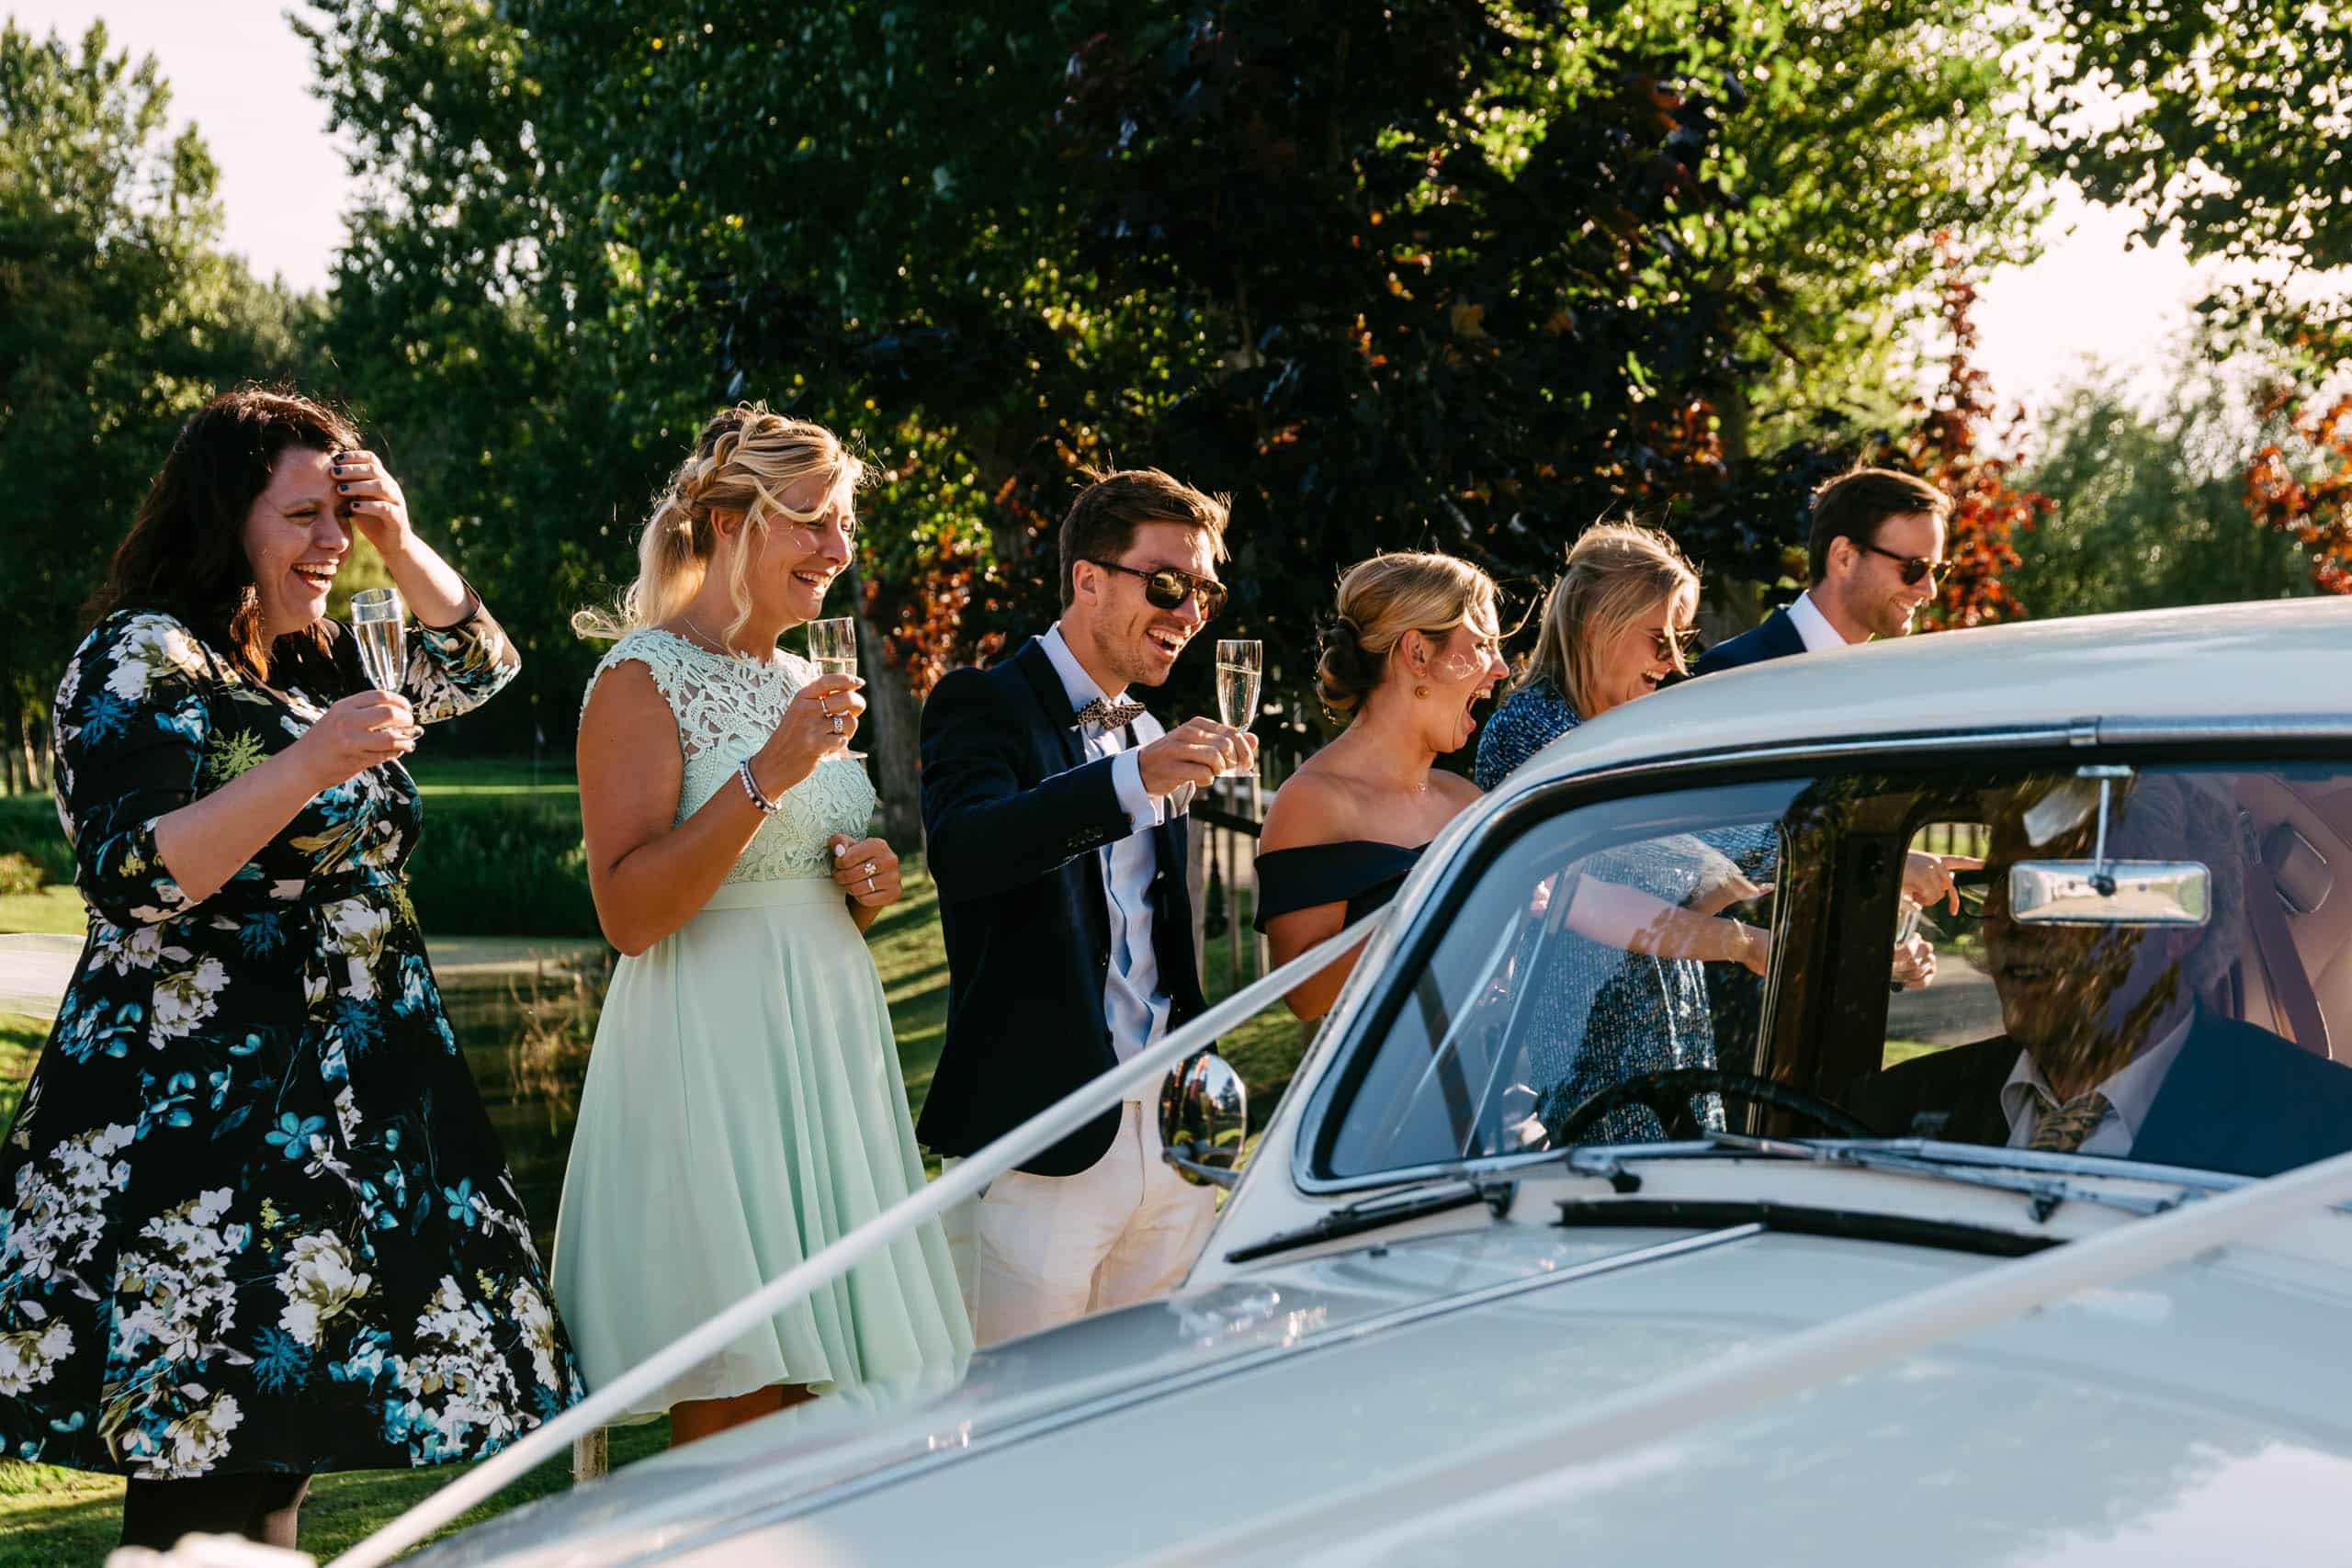 A group of bridesmaids and groom toast in front of a vintage car during their wedding party.